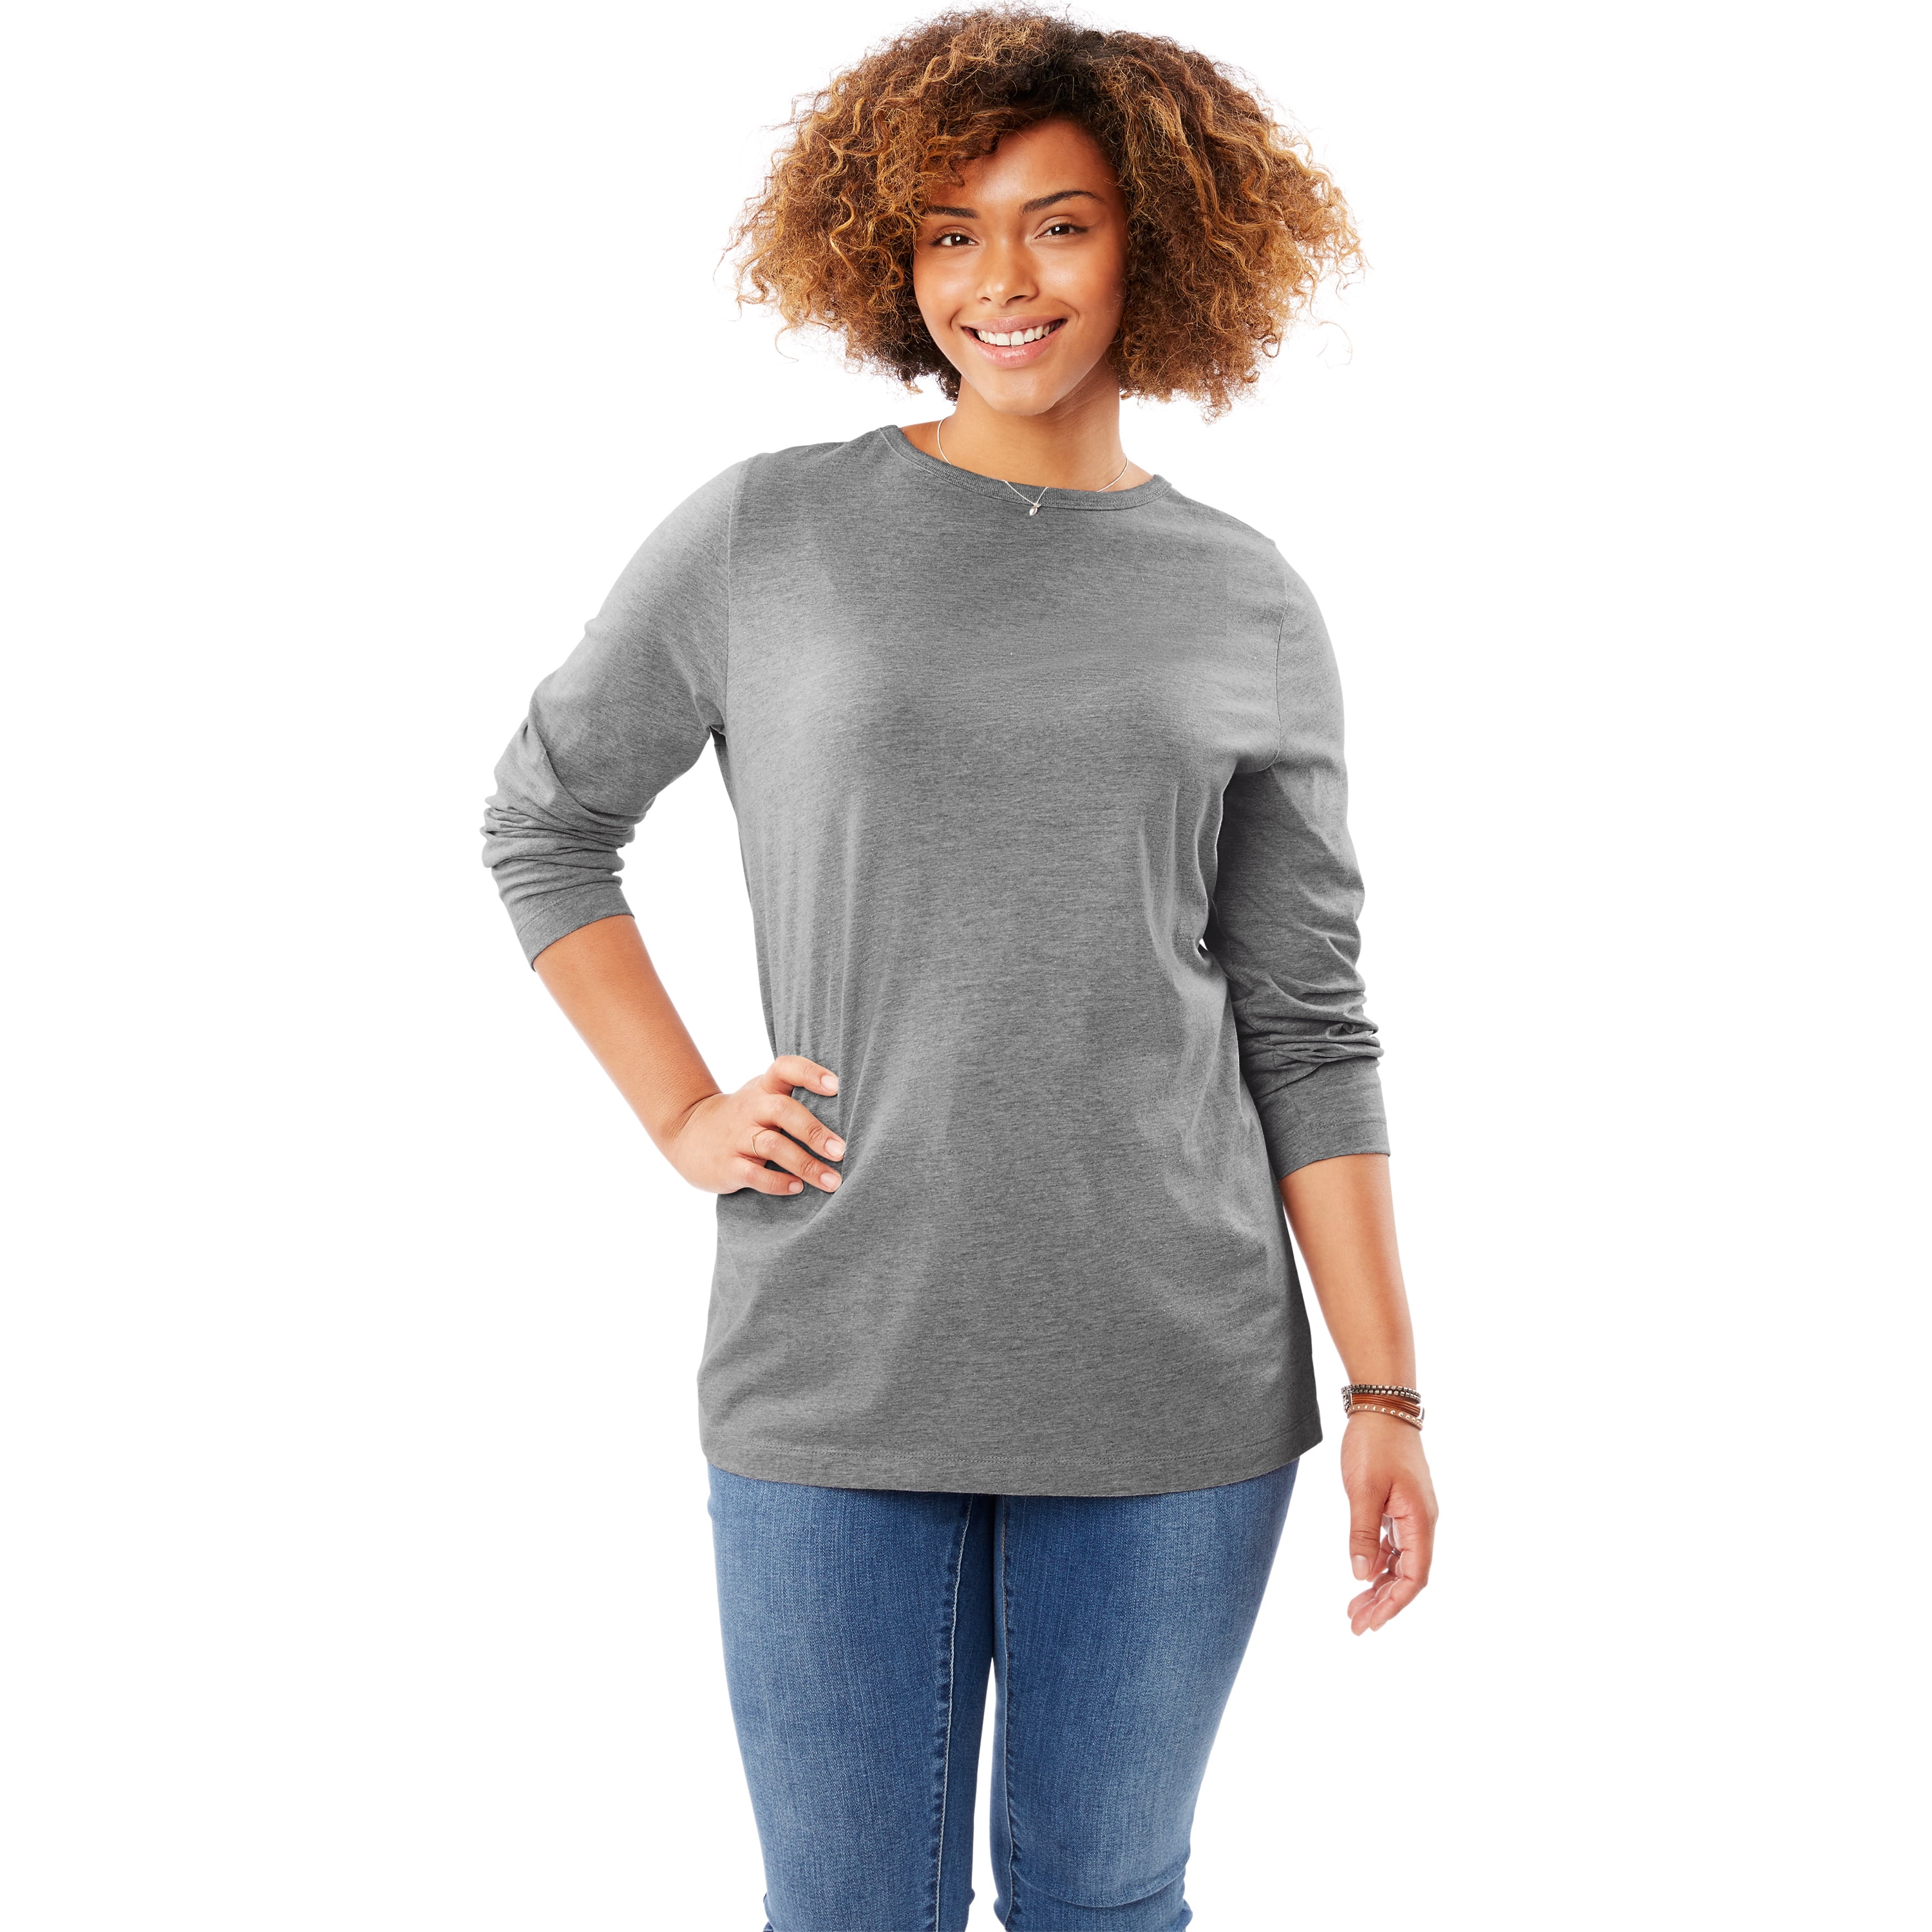 Woman Within Womens Plus Size Perfect Long-Sleeve Crewneck Tee Shirt 